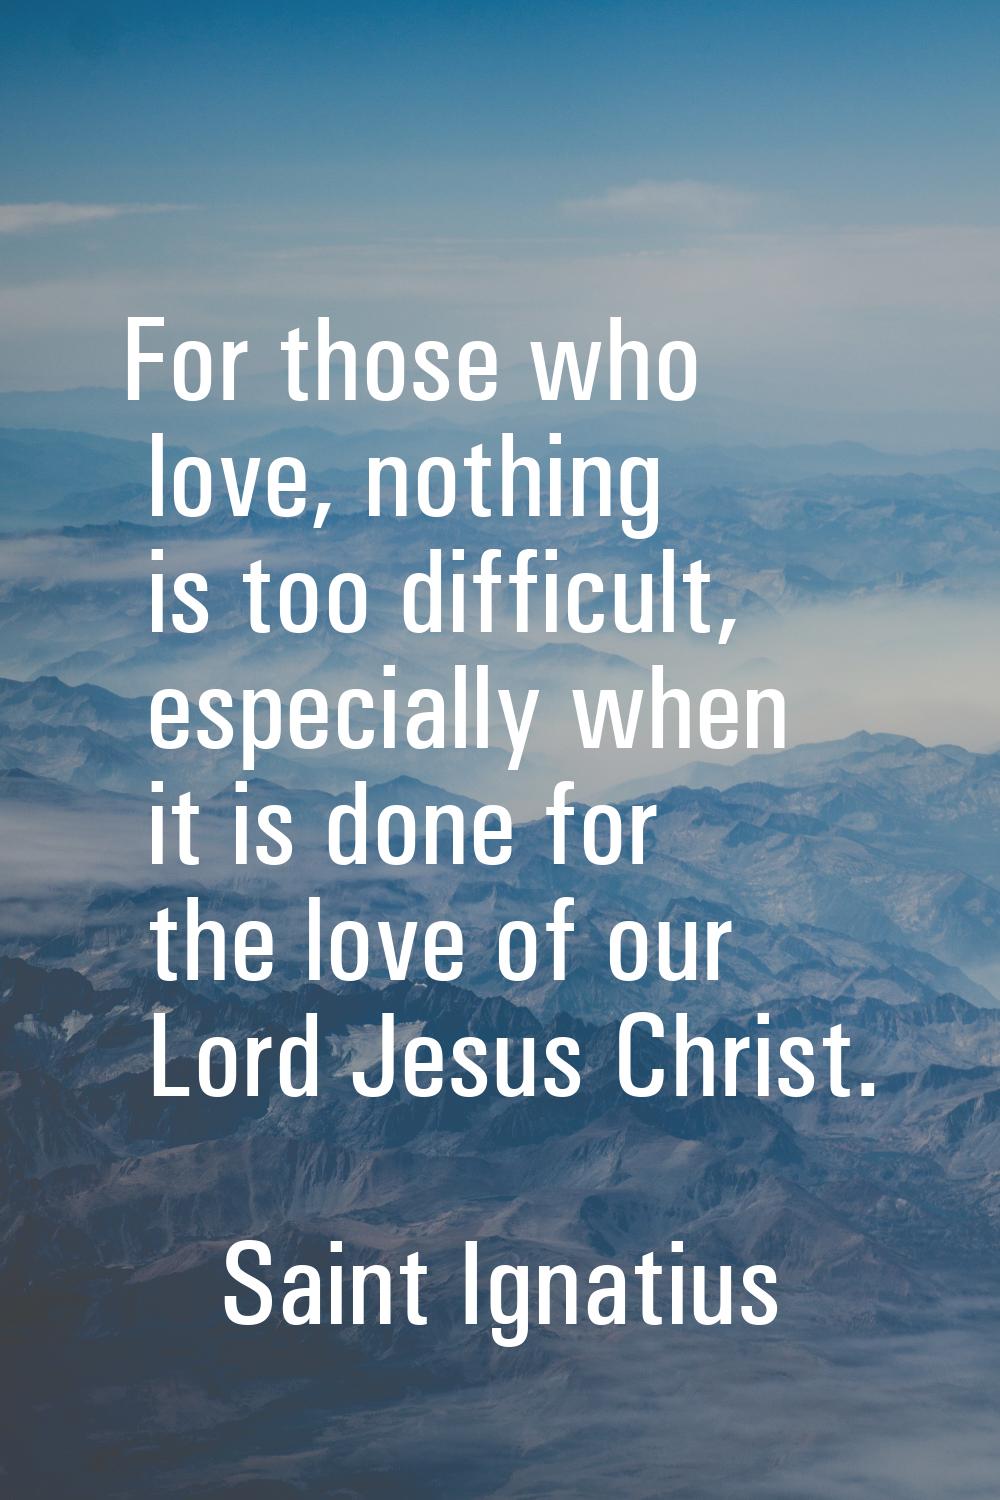 For those who love, nothing is too difficult, especially when it is done for the love of our Lord J